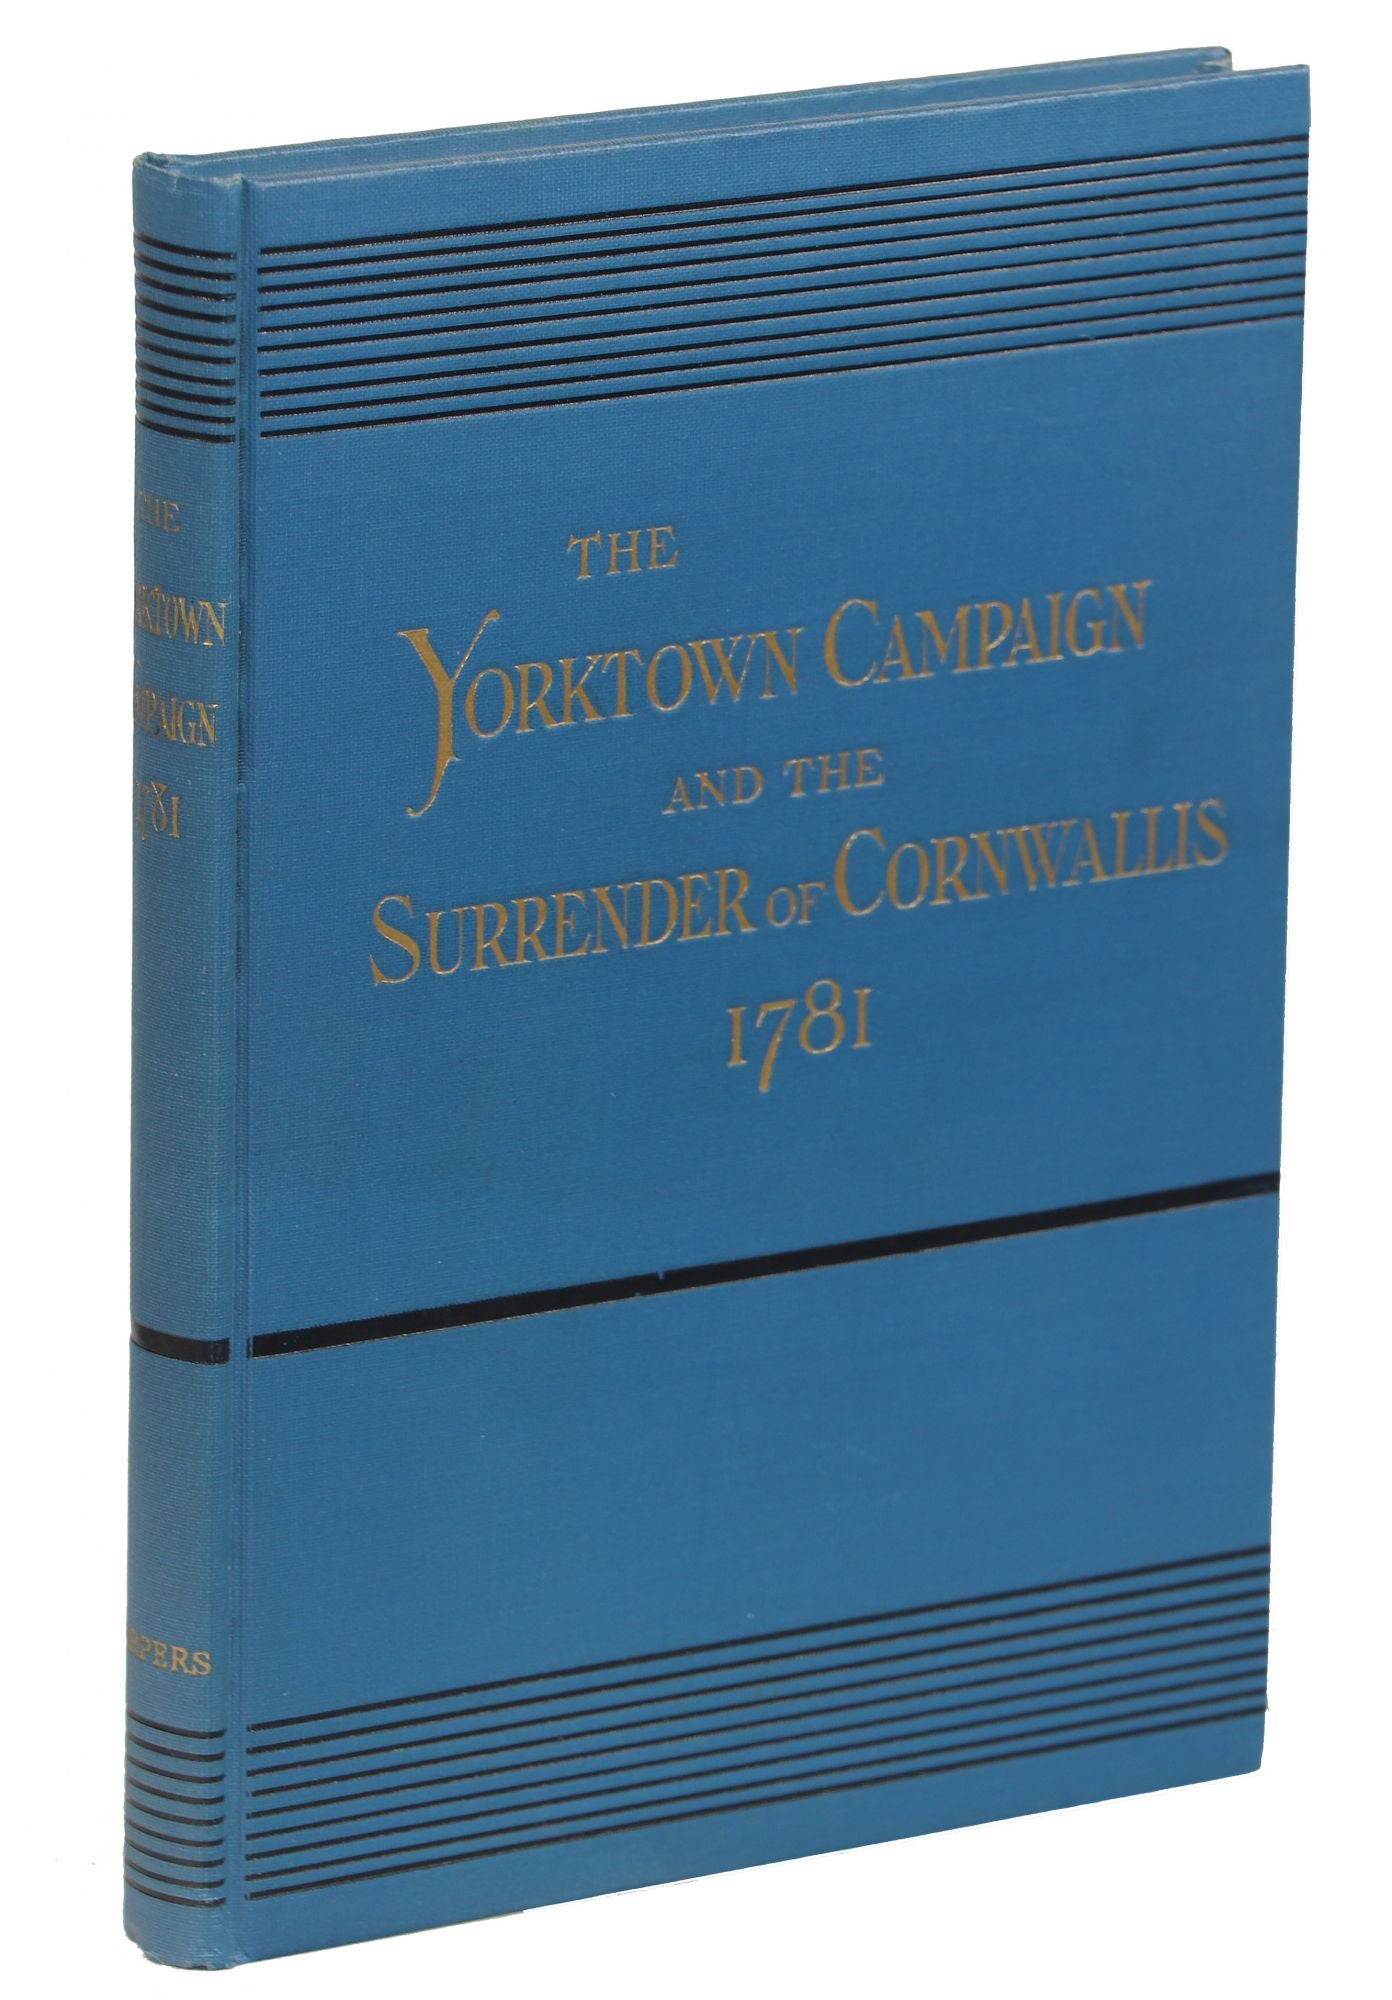 the　edition　Surrender　Later　1781　Yorktown　The　Henry　P.　and　Campaign　Cornwallis　of　Johnston